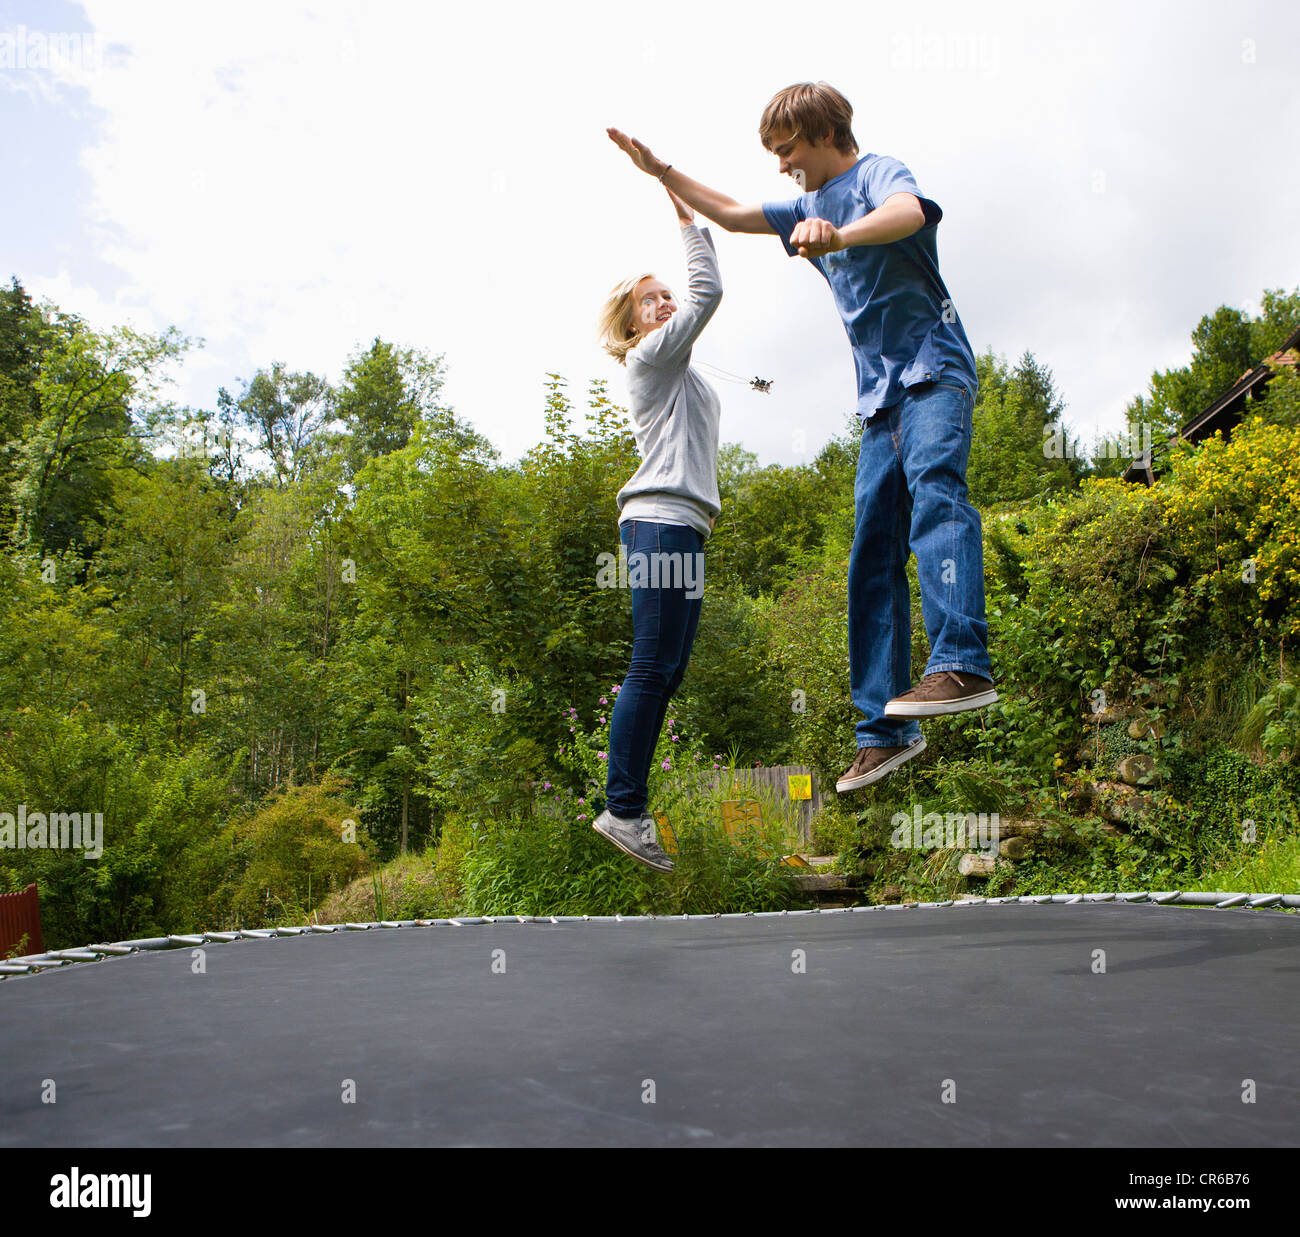 Austria, Young man and woman jumping on trampoline Stock Photo